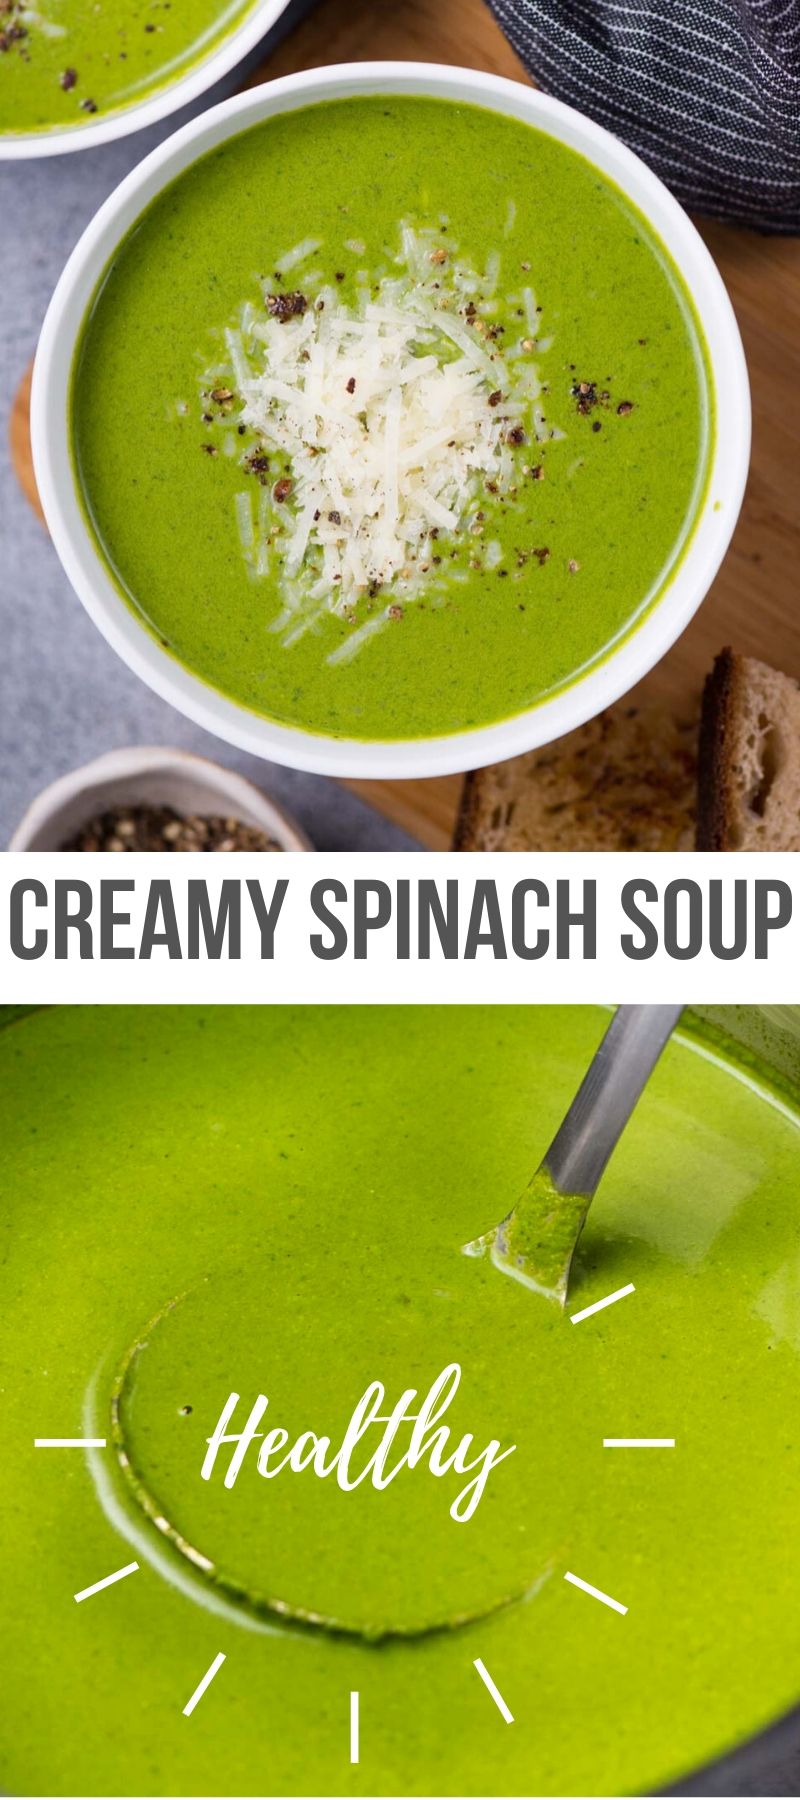 Healthy Spinach Soup Recipe | The flavours of kitchen